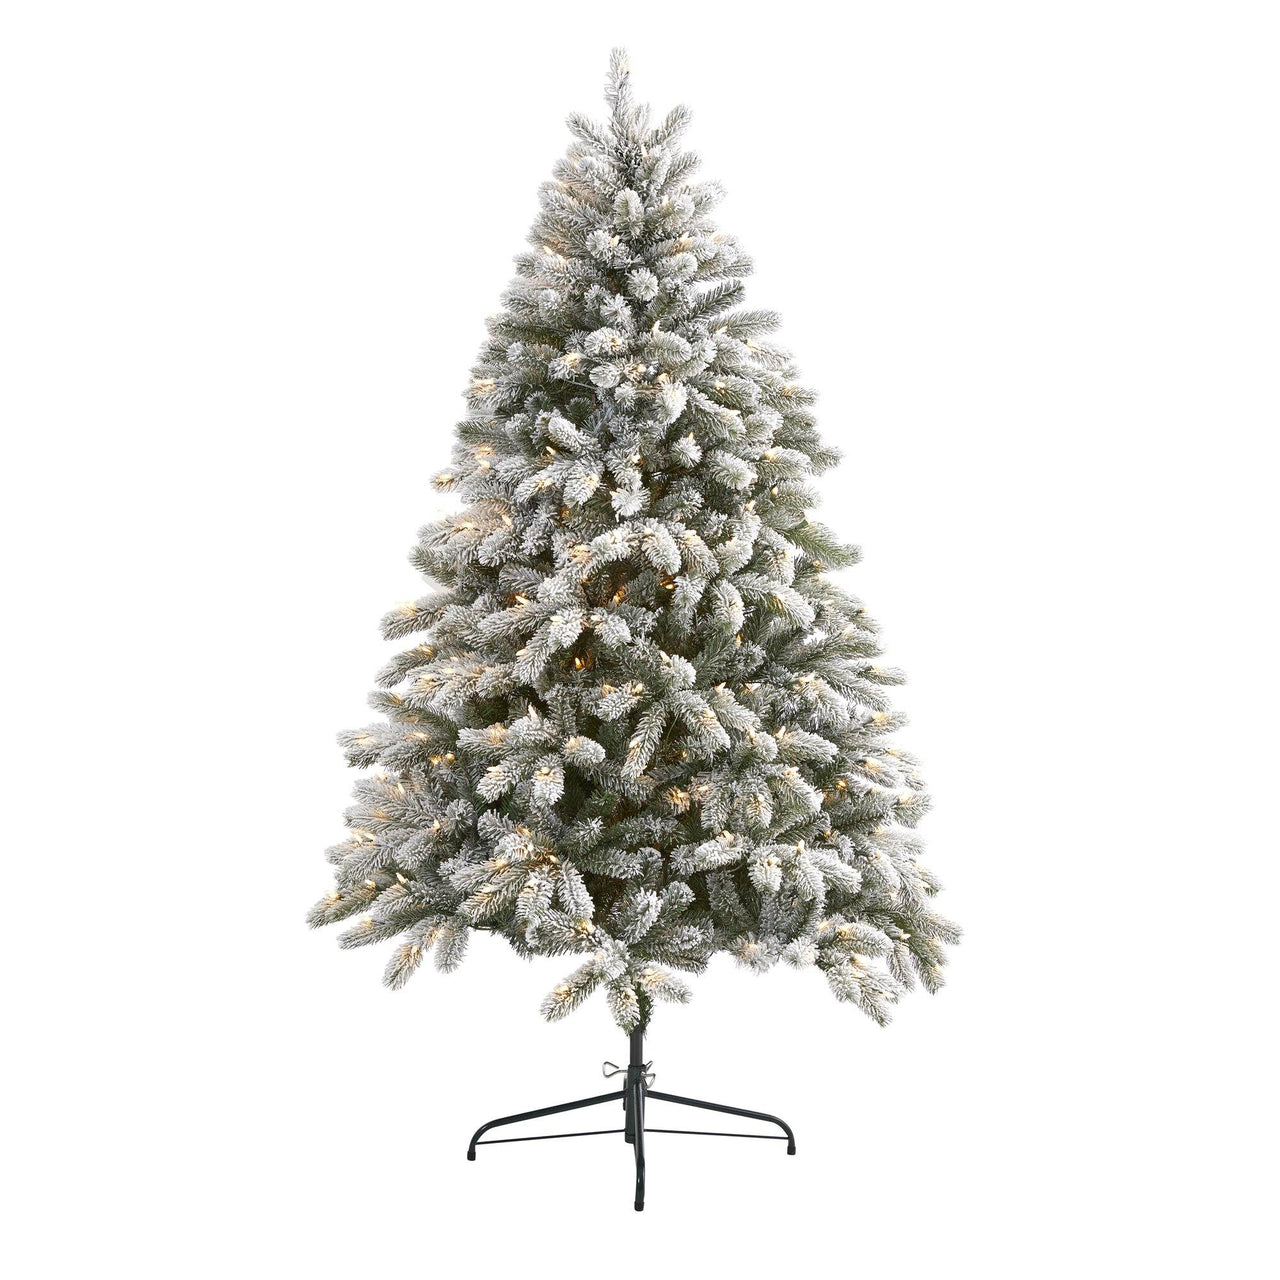 6’ Flocked South Carolina Spruce Artificial Christmas Tree with 450 Clear Lights and 925 Bendable Branches